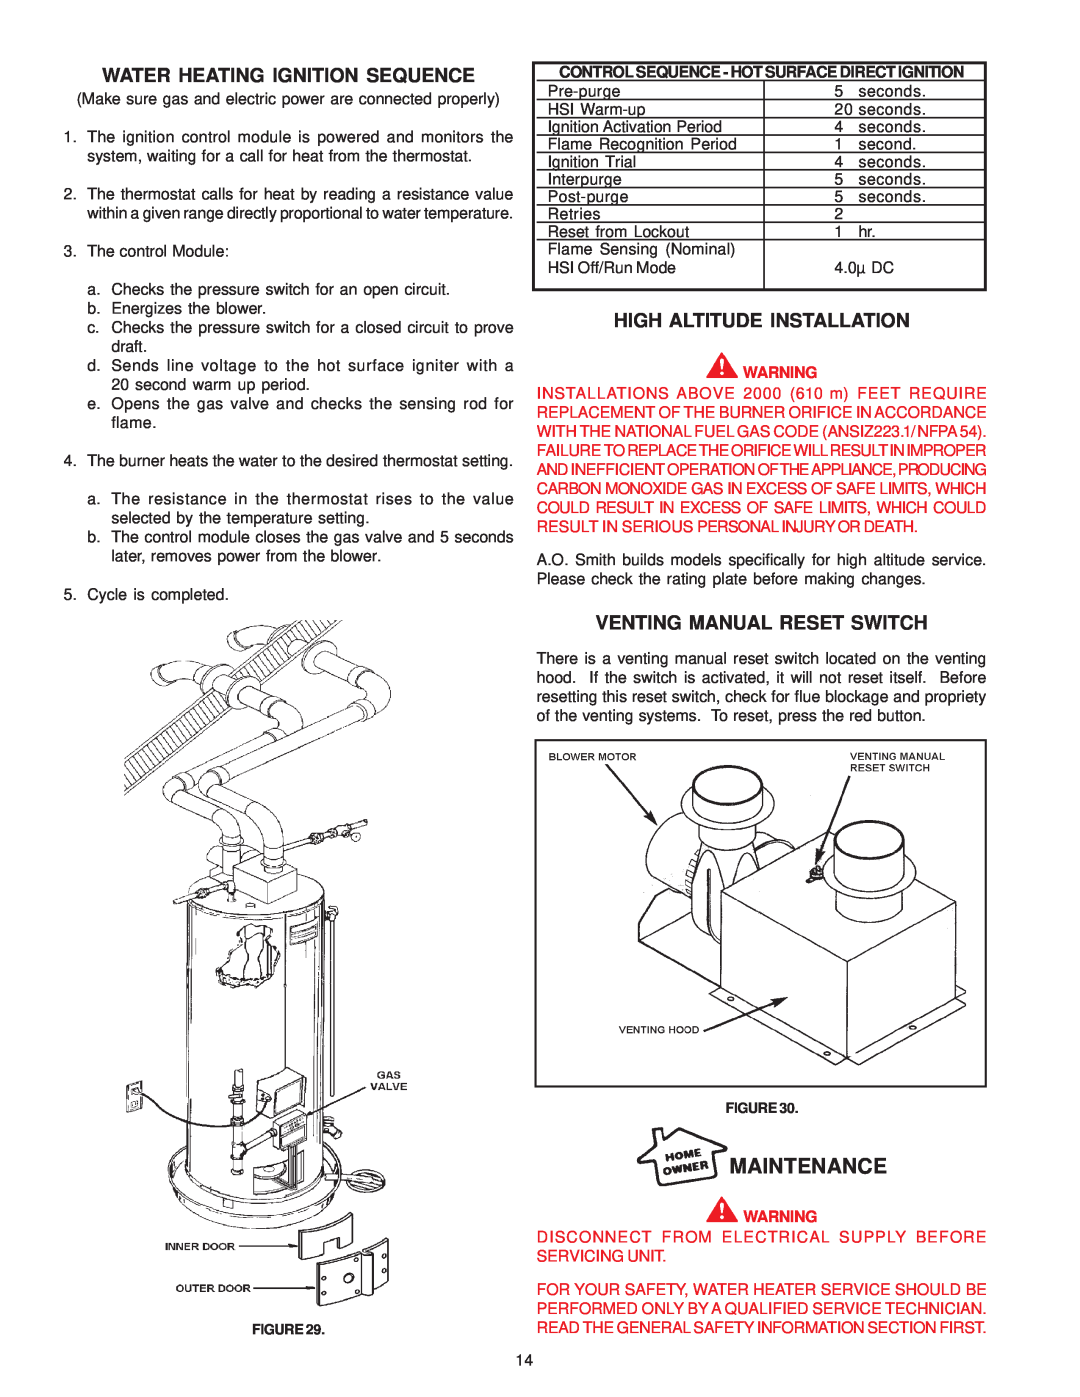 A.O. Smith GPDT Maintenance, Water Heating Ignition Sequence, High Altitude Installation, Venting Manual Reset Switch 